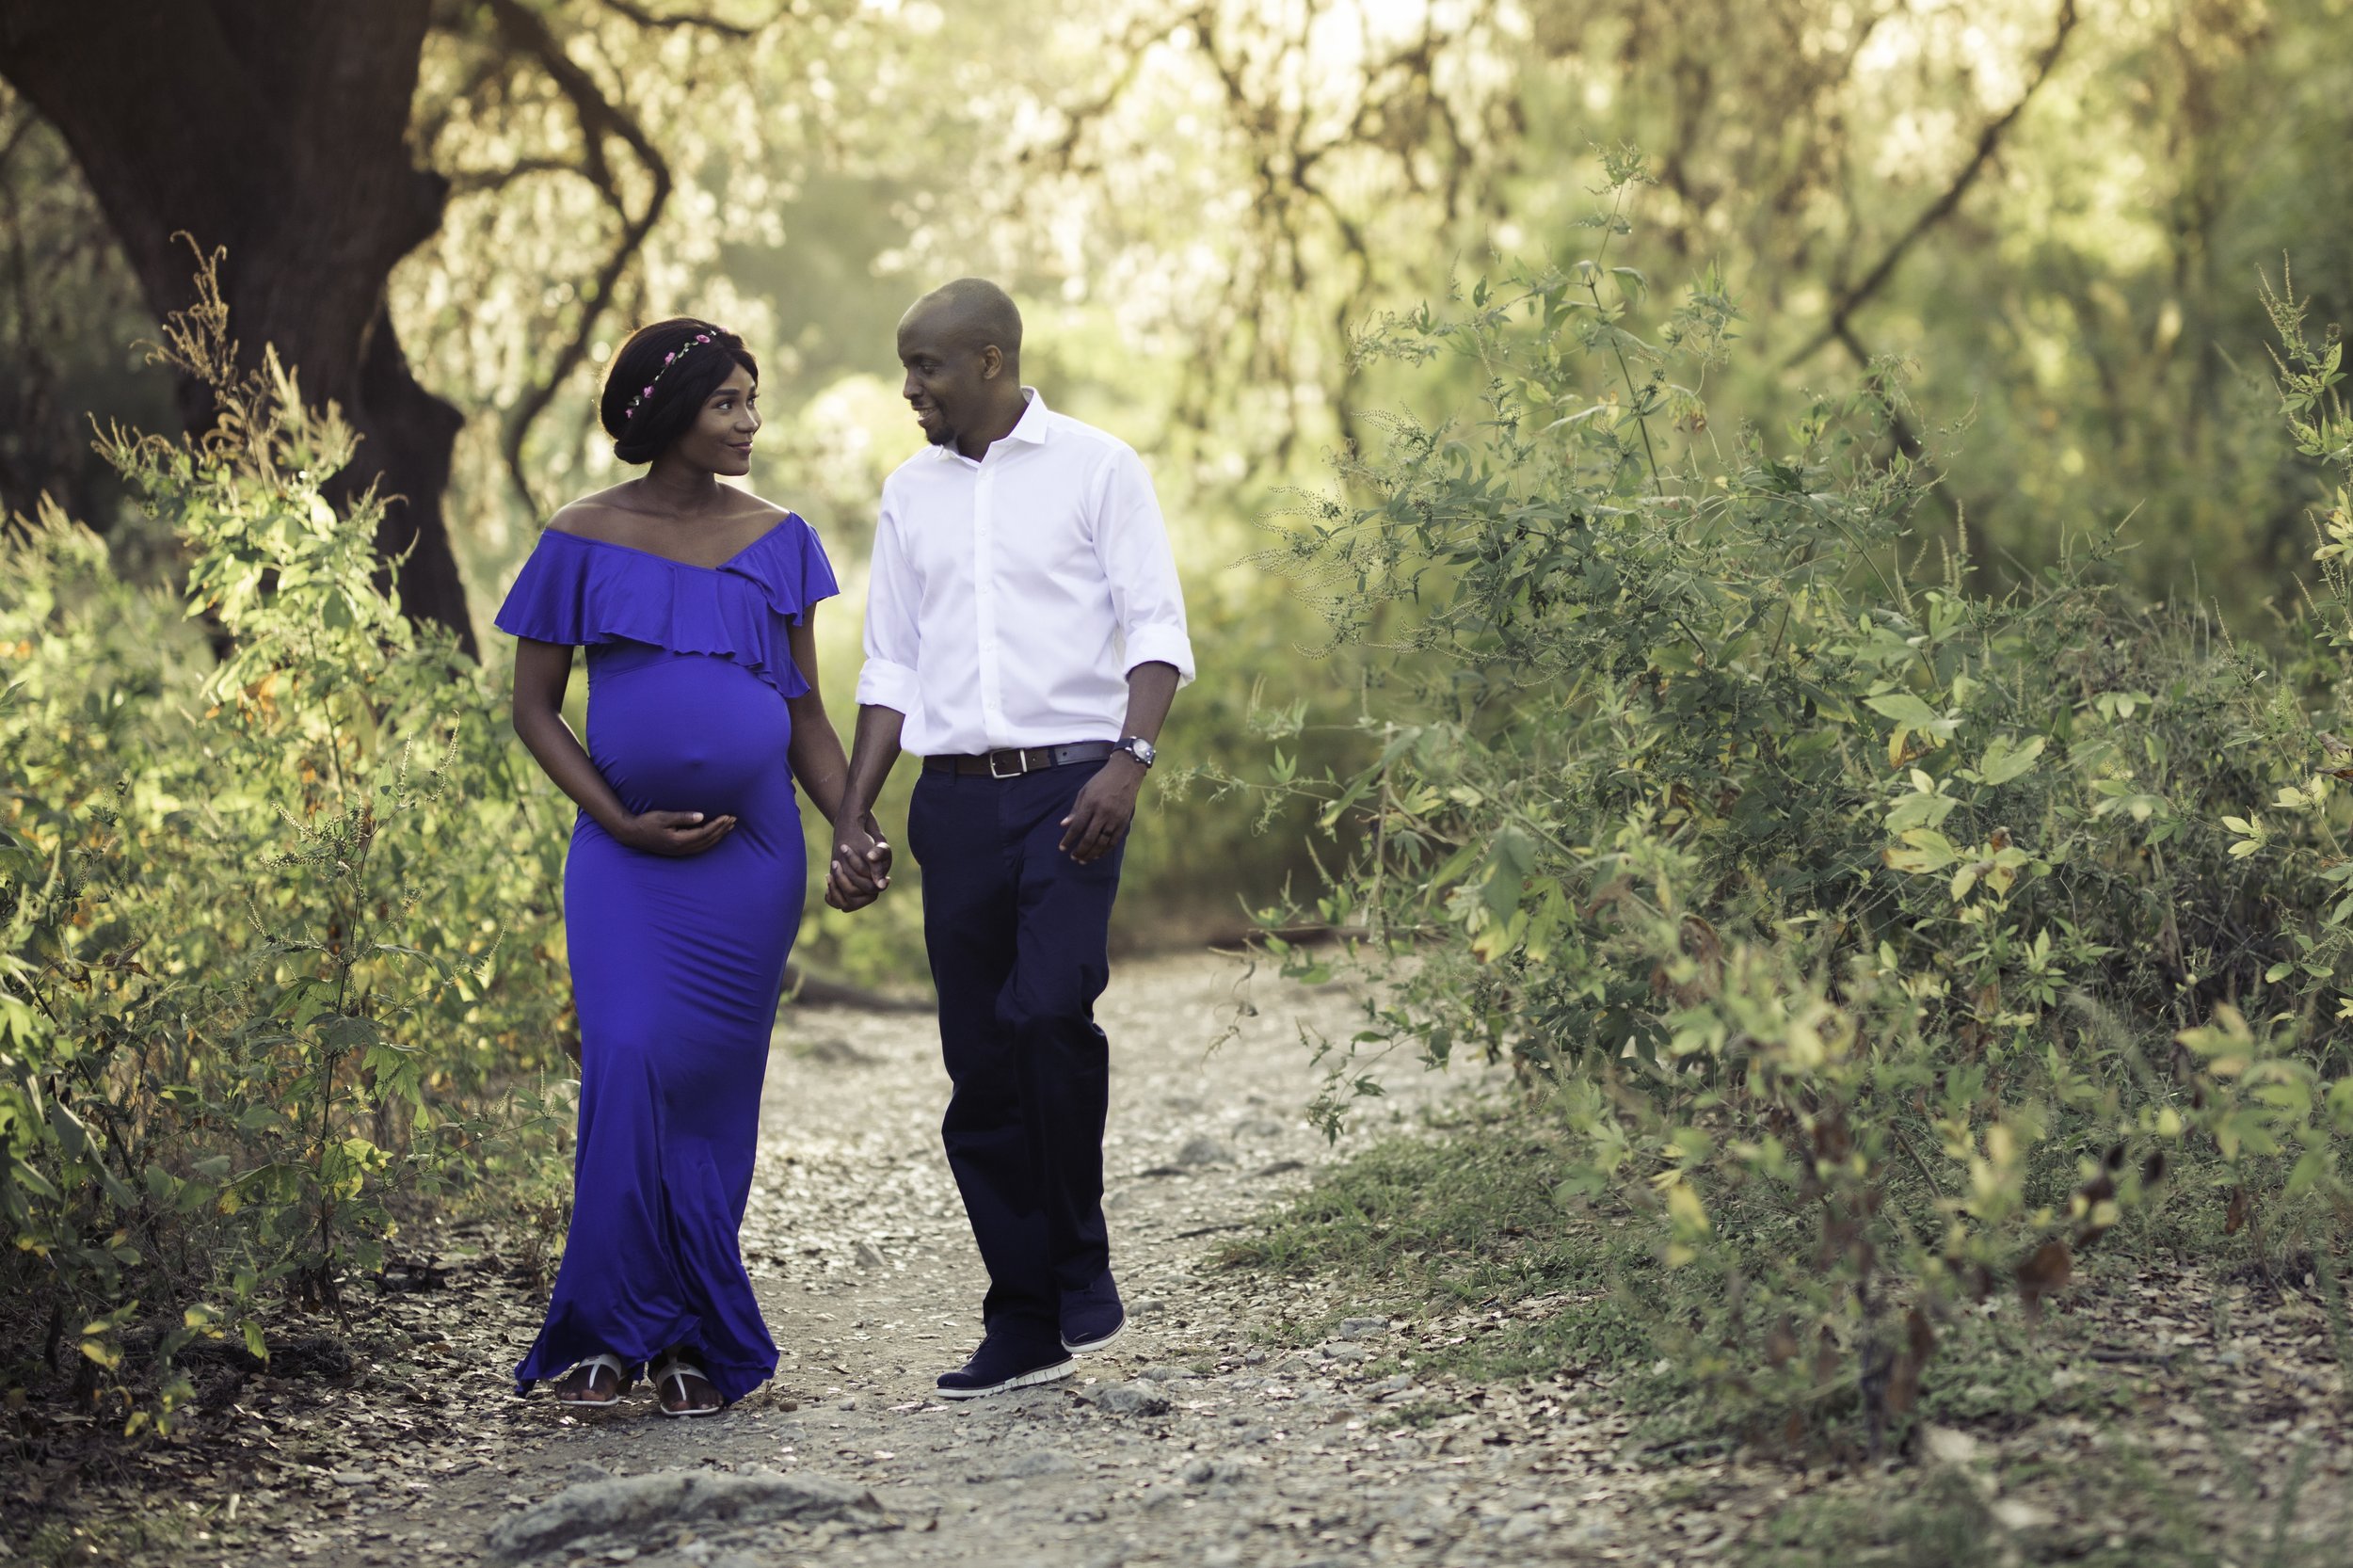  Couple walking together, looking at each other: Austin maternity photography 